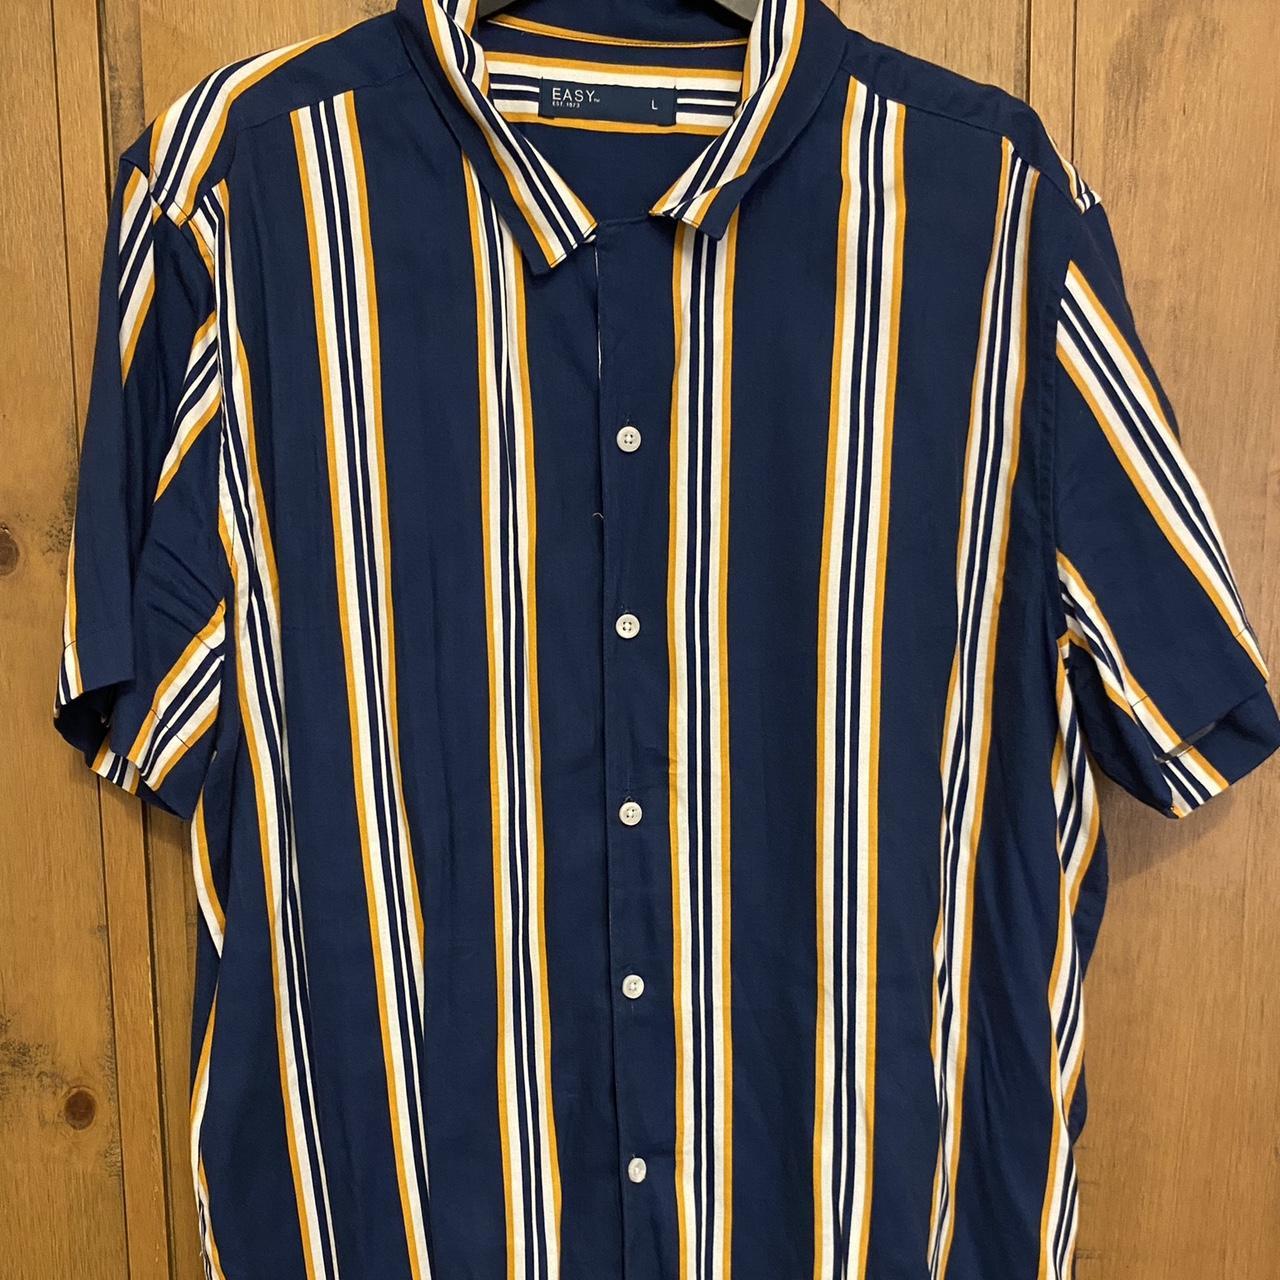 Men’s striped button shirt. Navy with white/yellow... - Depop